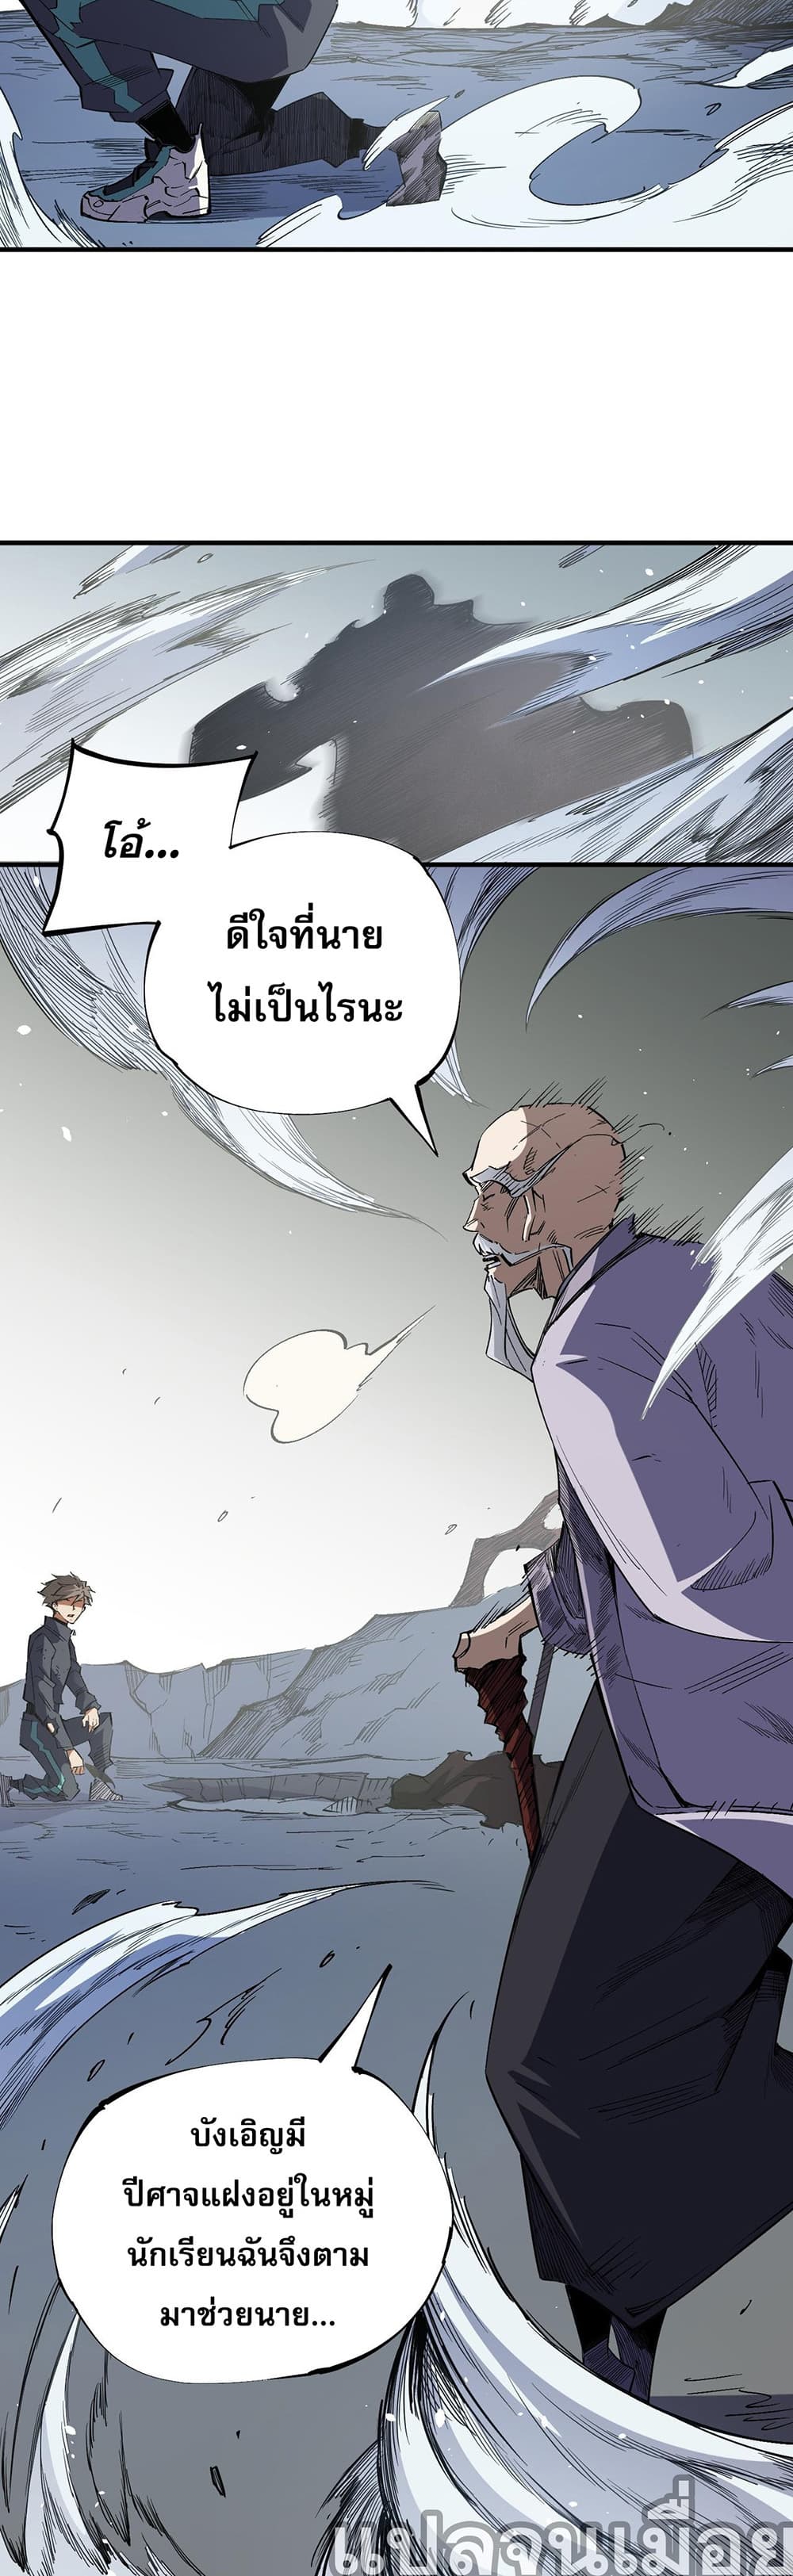 Job Changing for the Entire Population: The Jobless Me Will Terminate the Gods ฉันคือผู้เล่นไร้อาชีพที่สังหารเหล่าเทพ 44-44